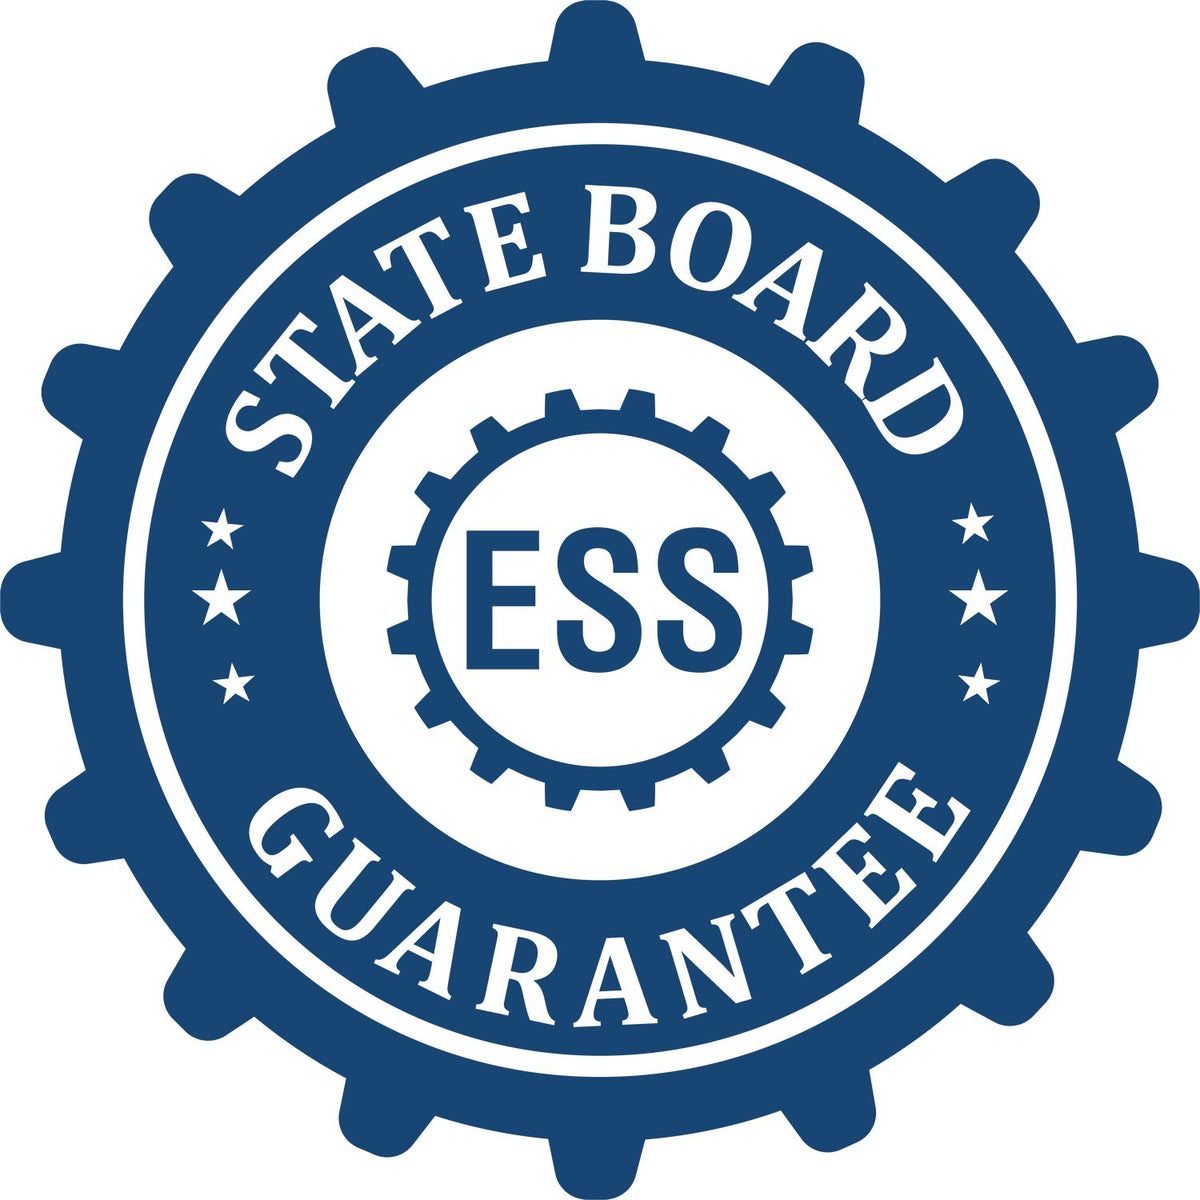 An emblem in a gear shape illustrating a state board guarantee for the Heavy Duty Cast Iron Nebraska Architect Embosser product.